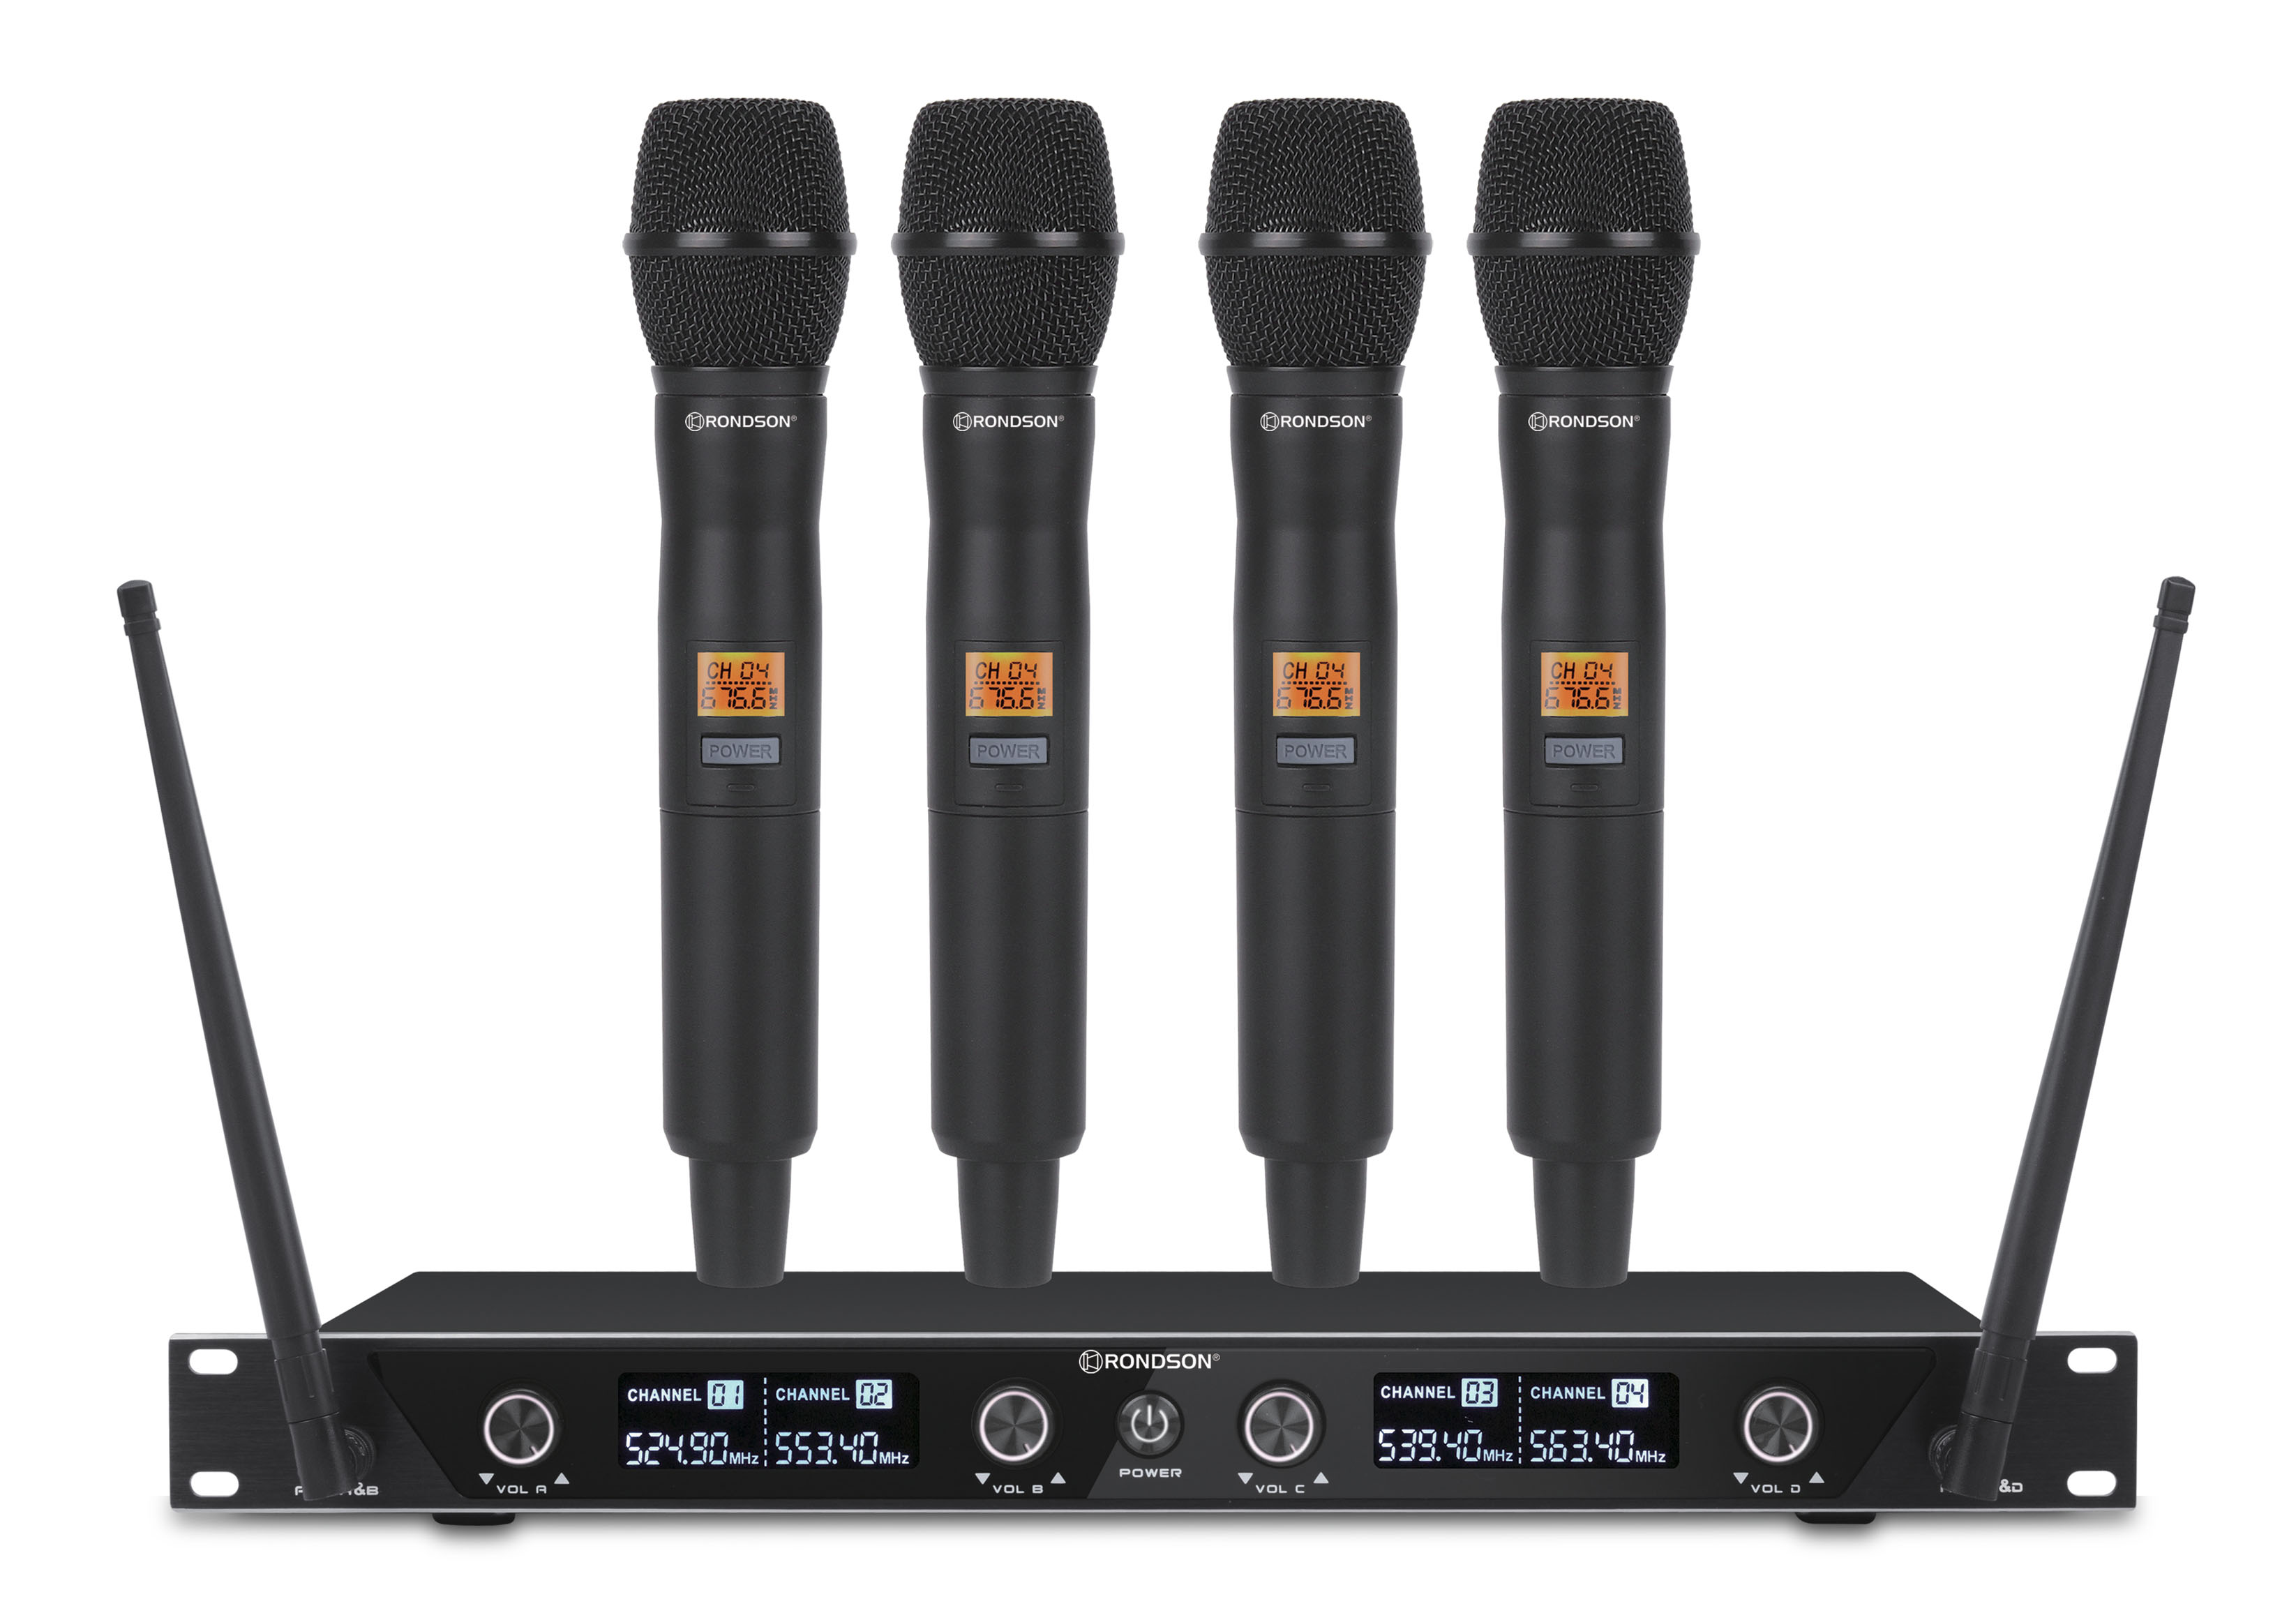 4-channel UHF wireless microphone system